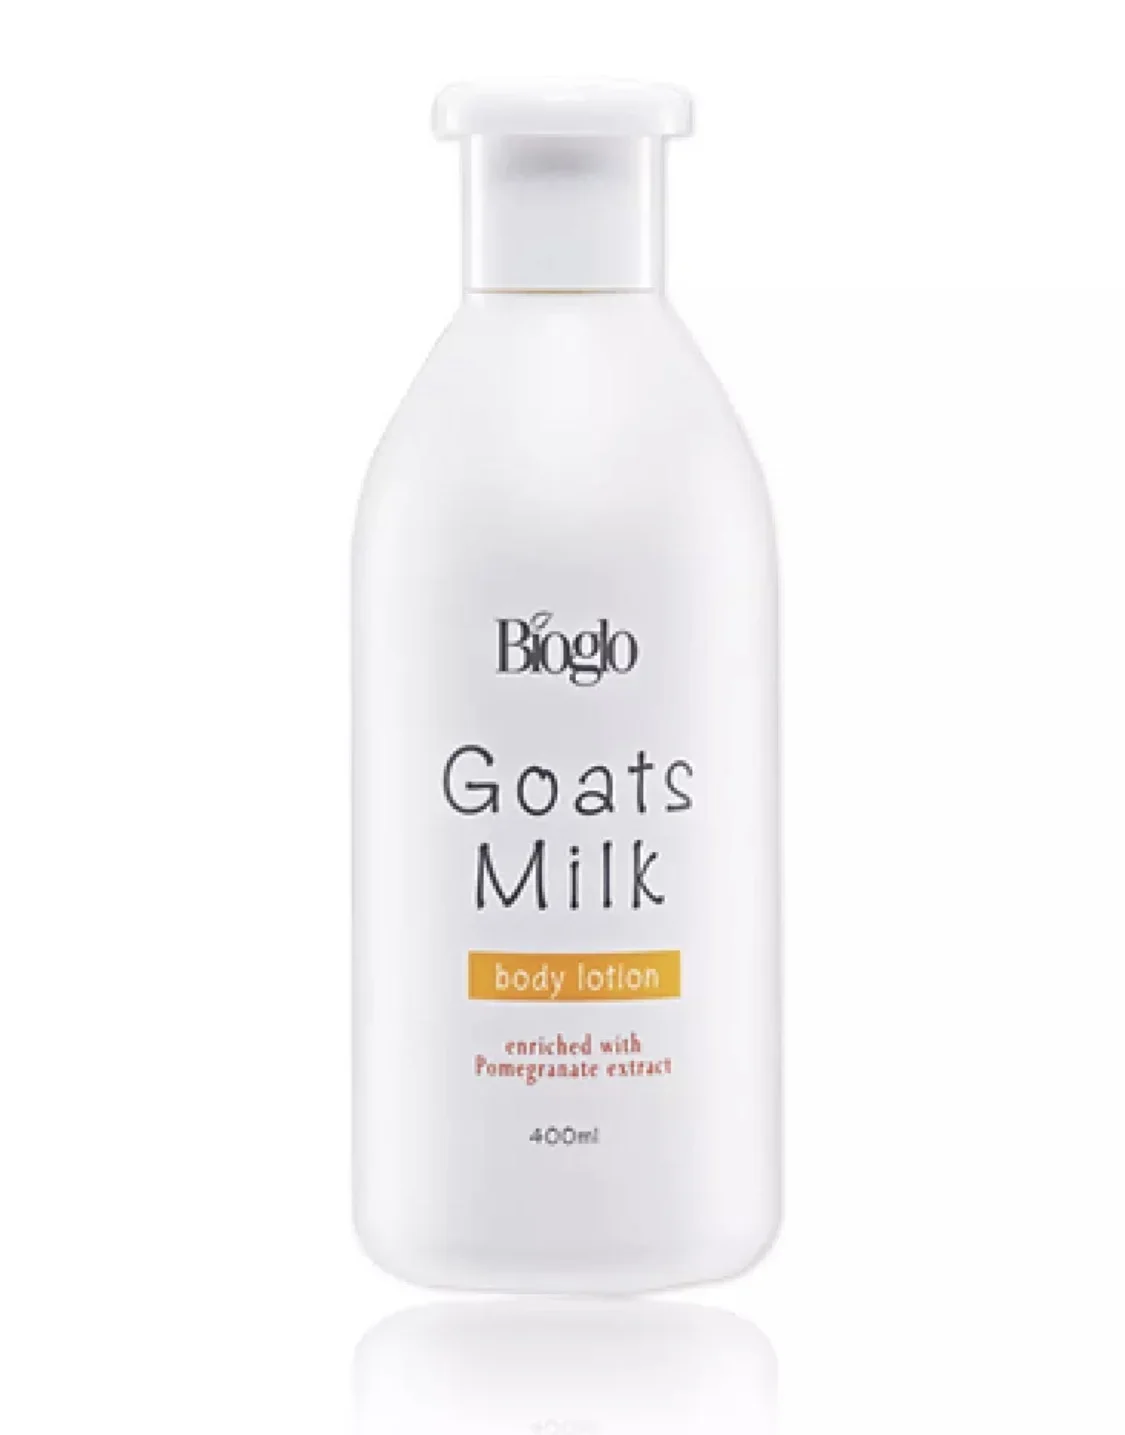 Bioglo Goats Milk with Pomegranate Extract Body Lotion 400ml (Cosway)